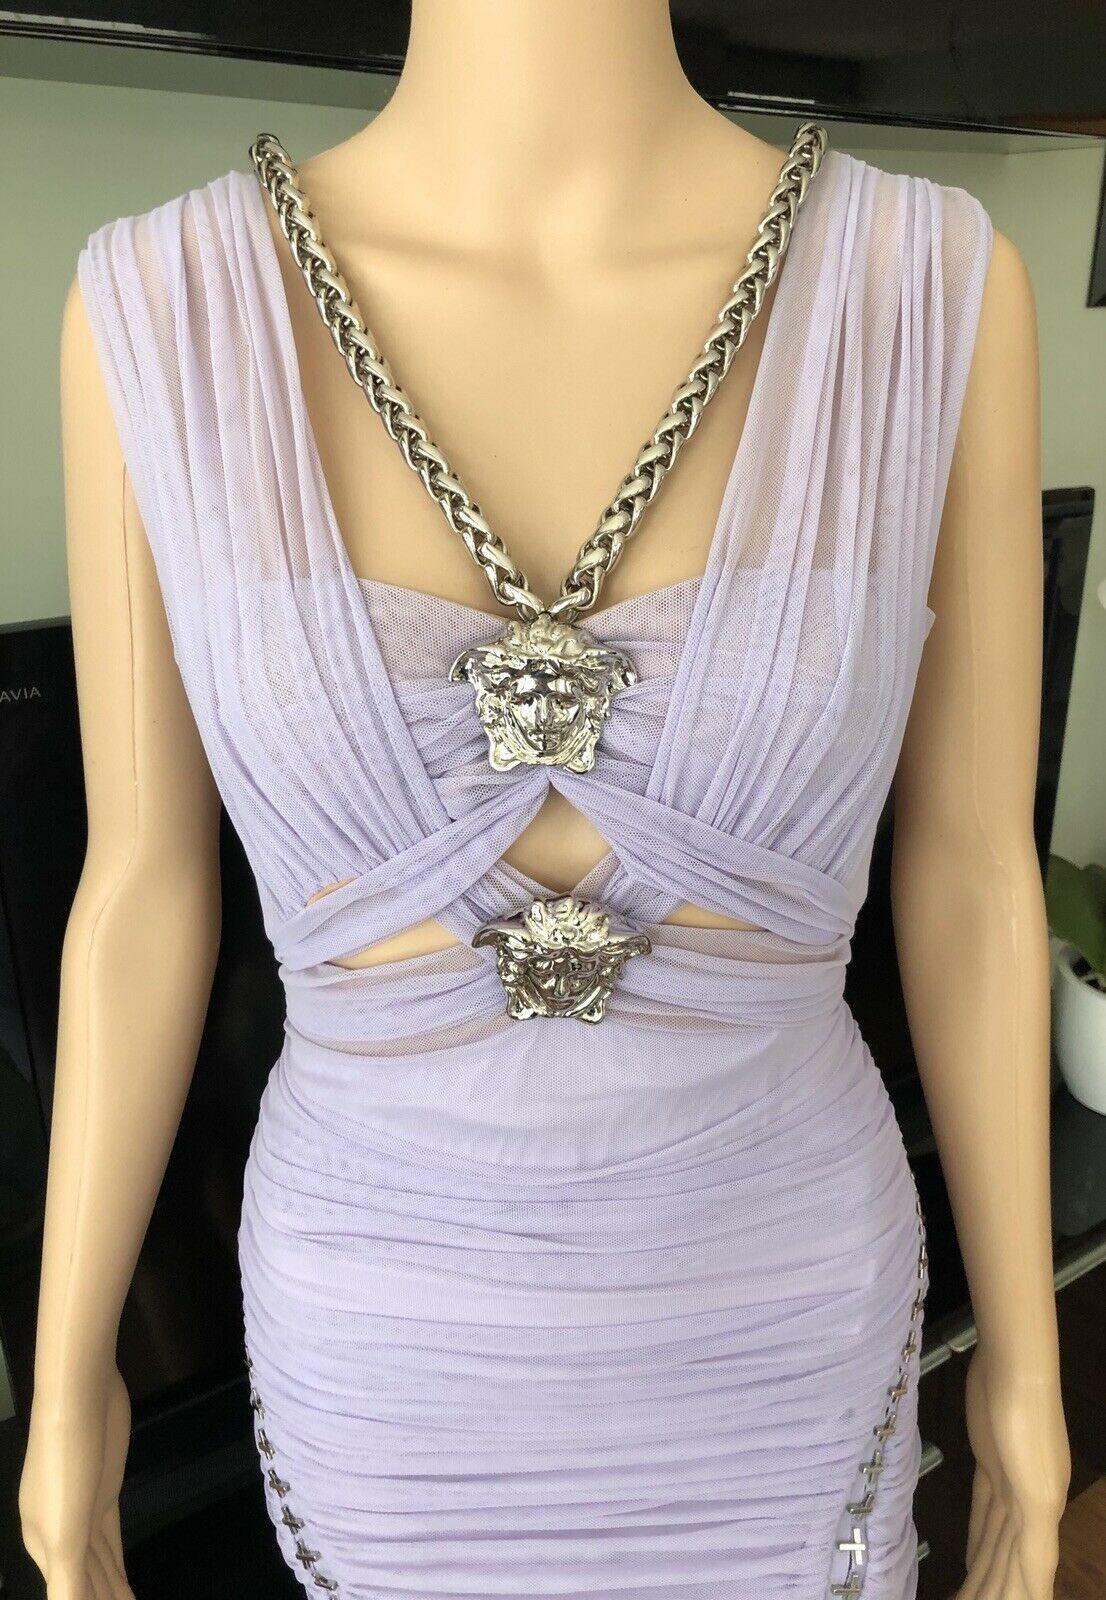 Versace Runway Medusa and Chain Embellished Cutout Dress IT 44 Editorial Piece!

Lavender Versace knee-length dress featuring V-neck, silver-tone Medusa head embellishments at bust with chain-link trim, ruched accents throughout and zip closure at